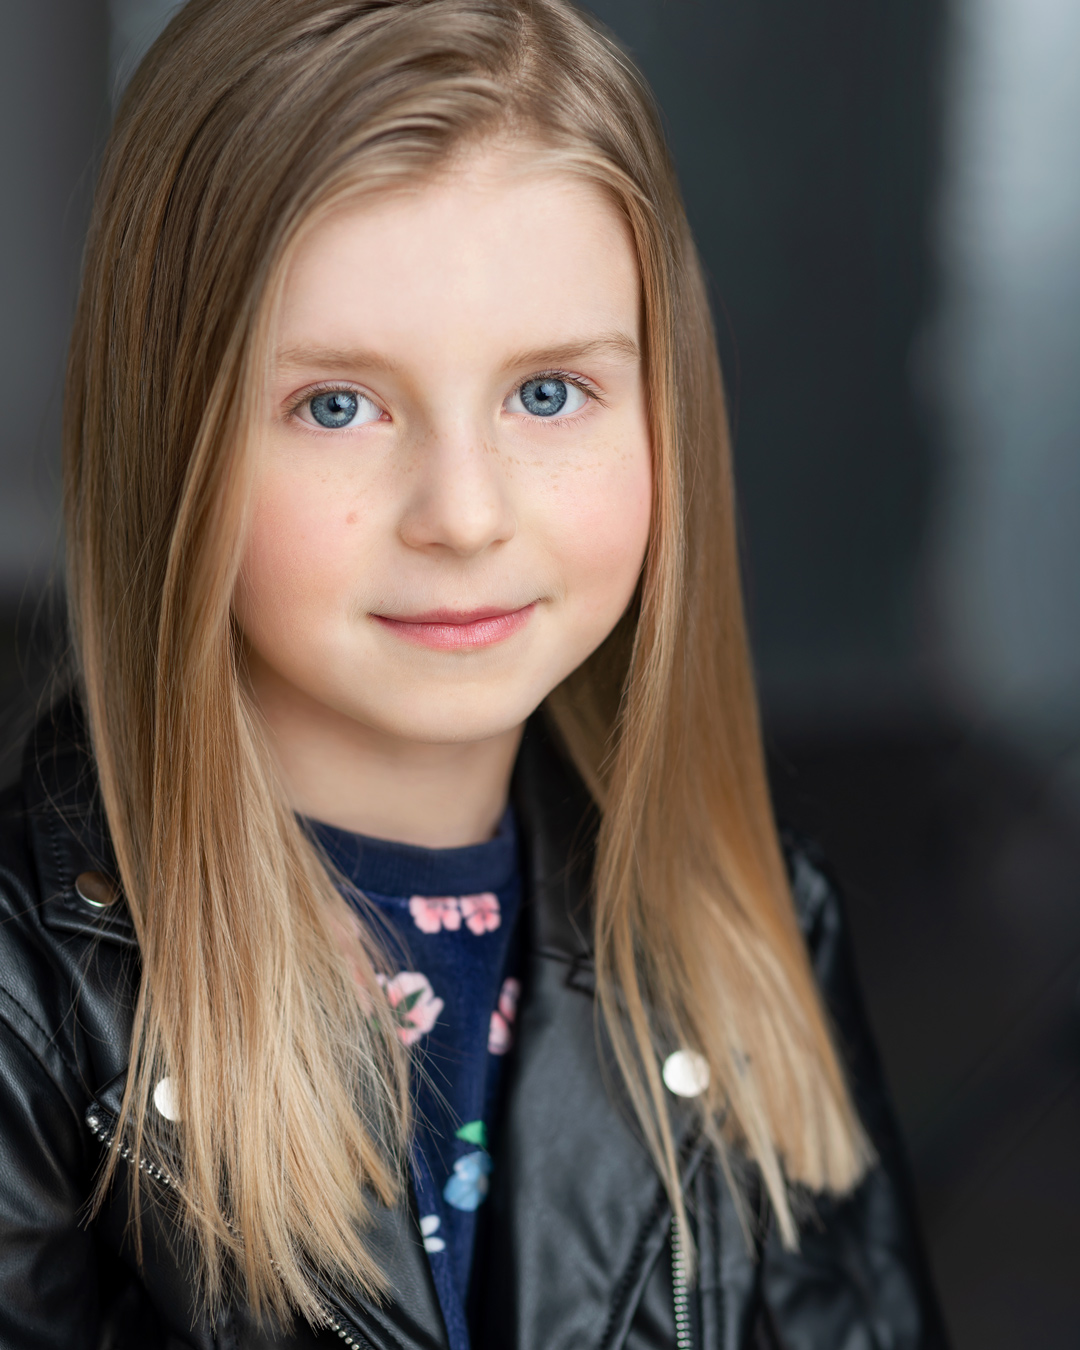 Vancouver child actress Adela Drabek from LeBlanc School of Acting